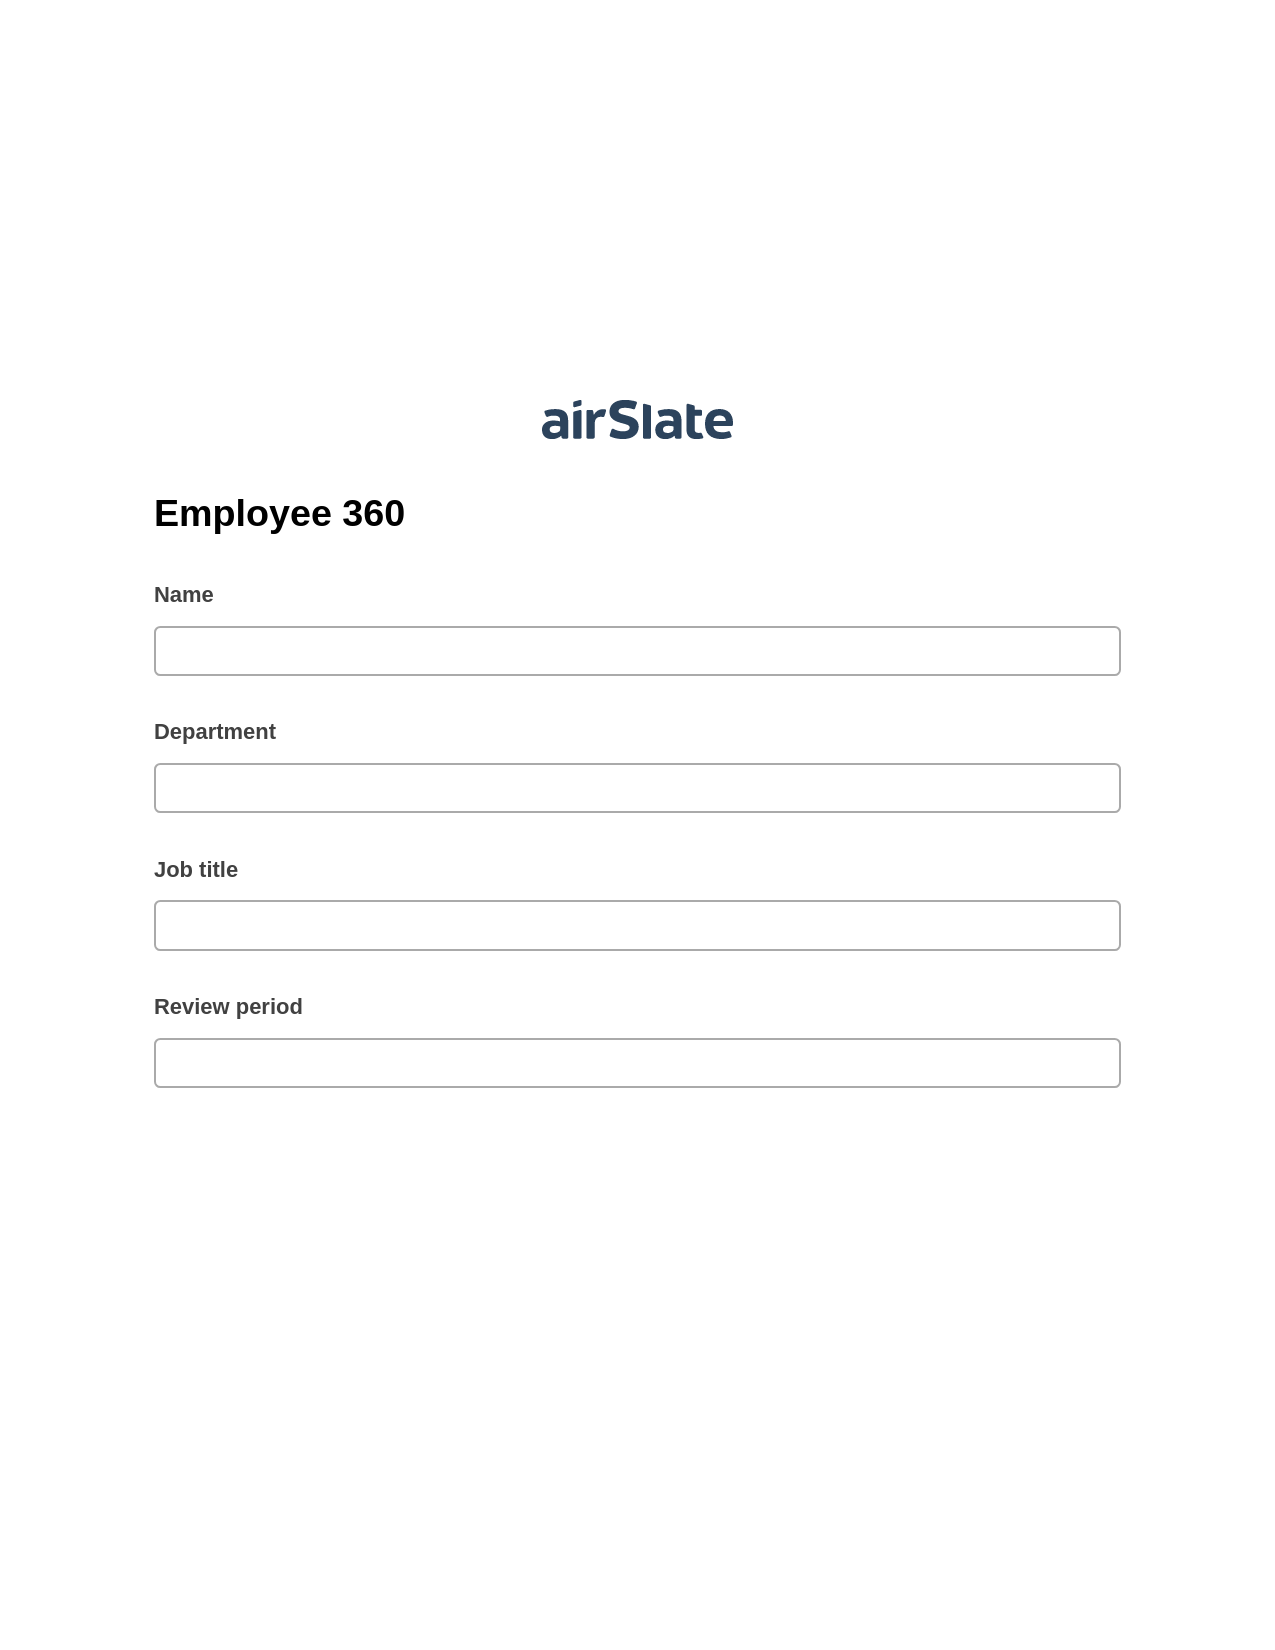 Multirole Employee 360 Pre-fill from AirTable Bot, Update MS Dynamics 365 Record Bot, Export to NetSuite Bot